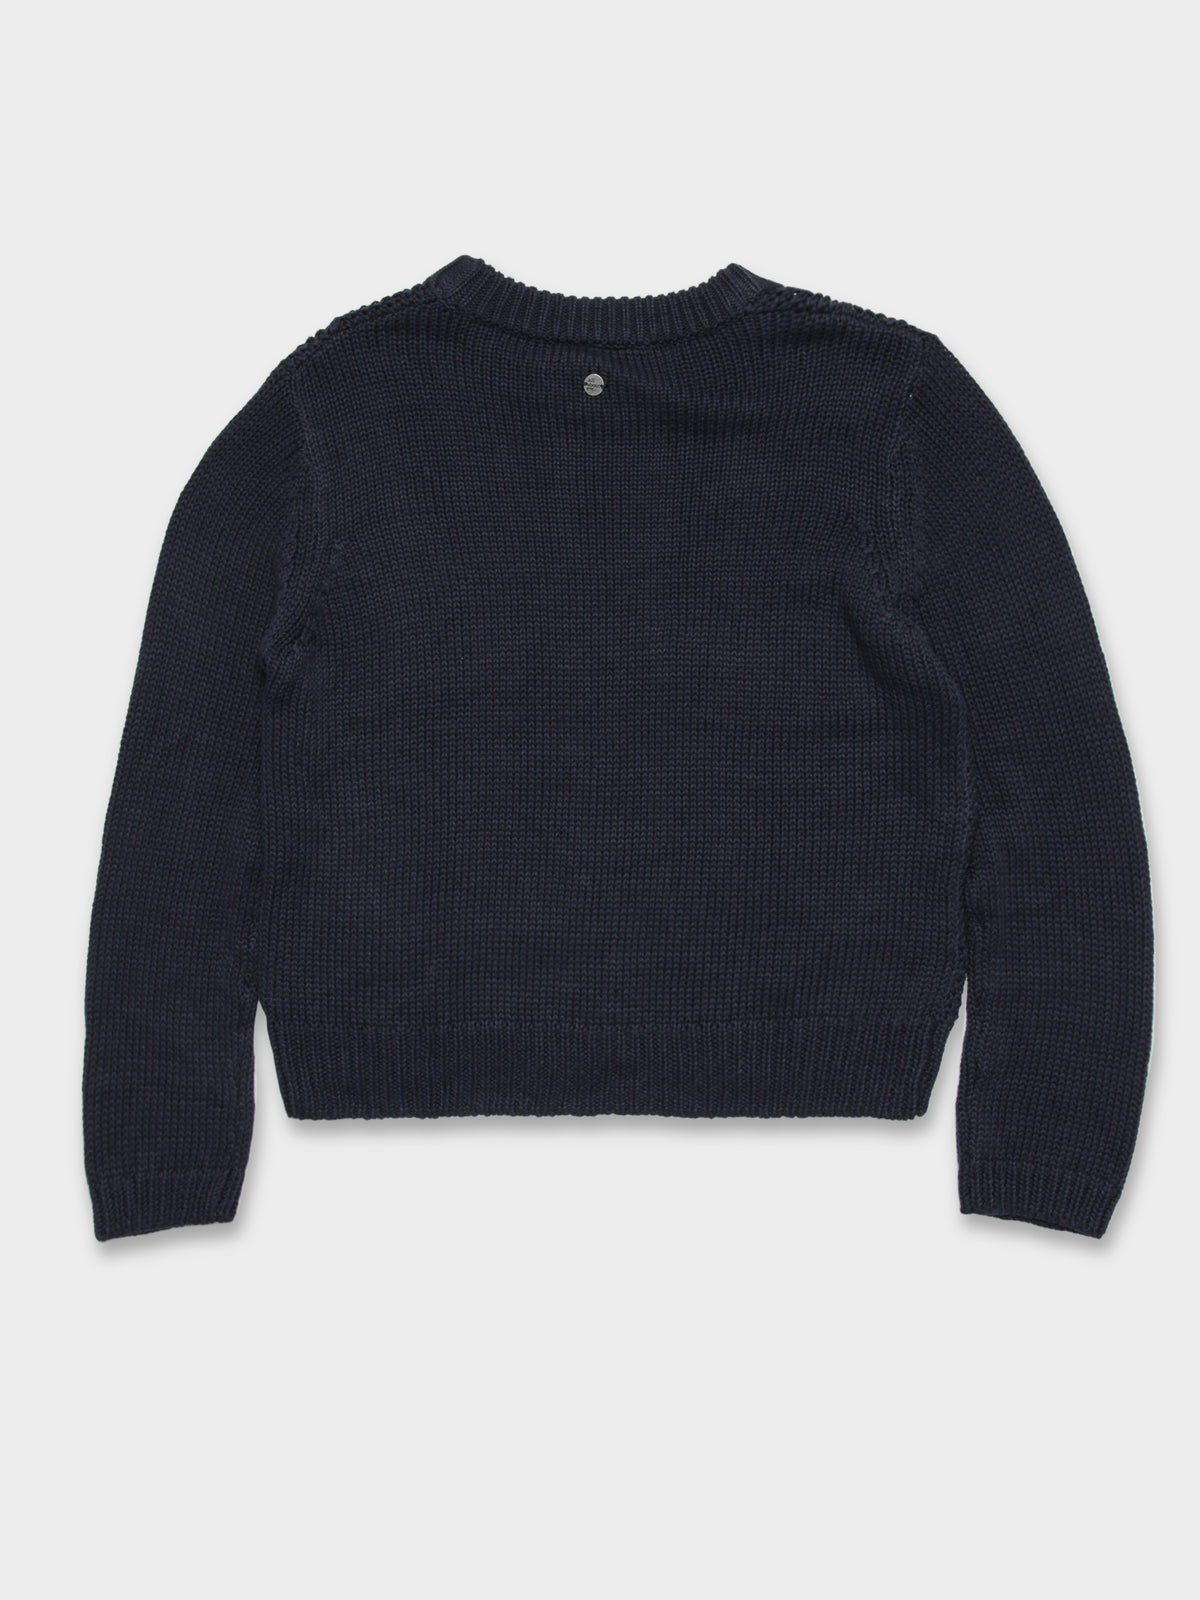 Missing Link Knit in Navy